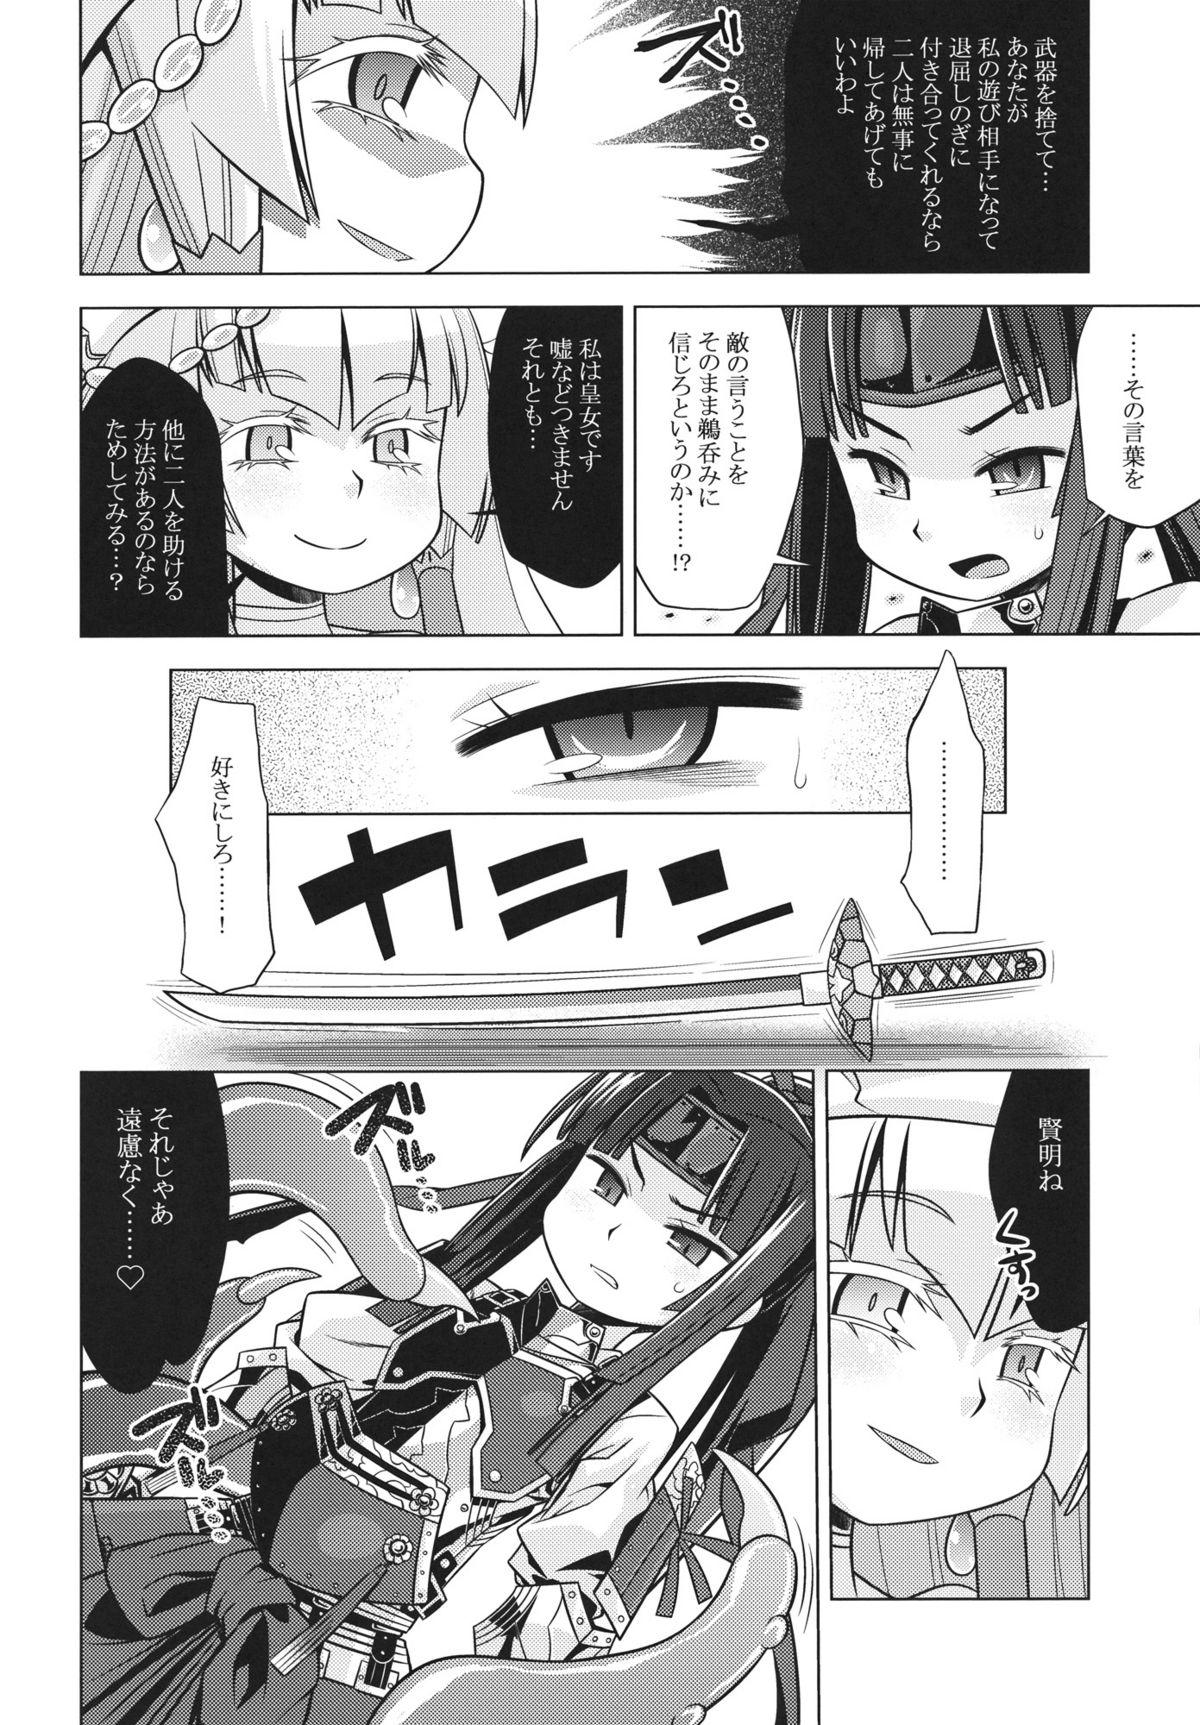 Pica Sekaiju no Anone 20 - Etrian odyssey From - Page 4